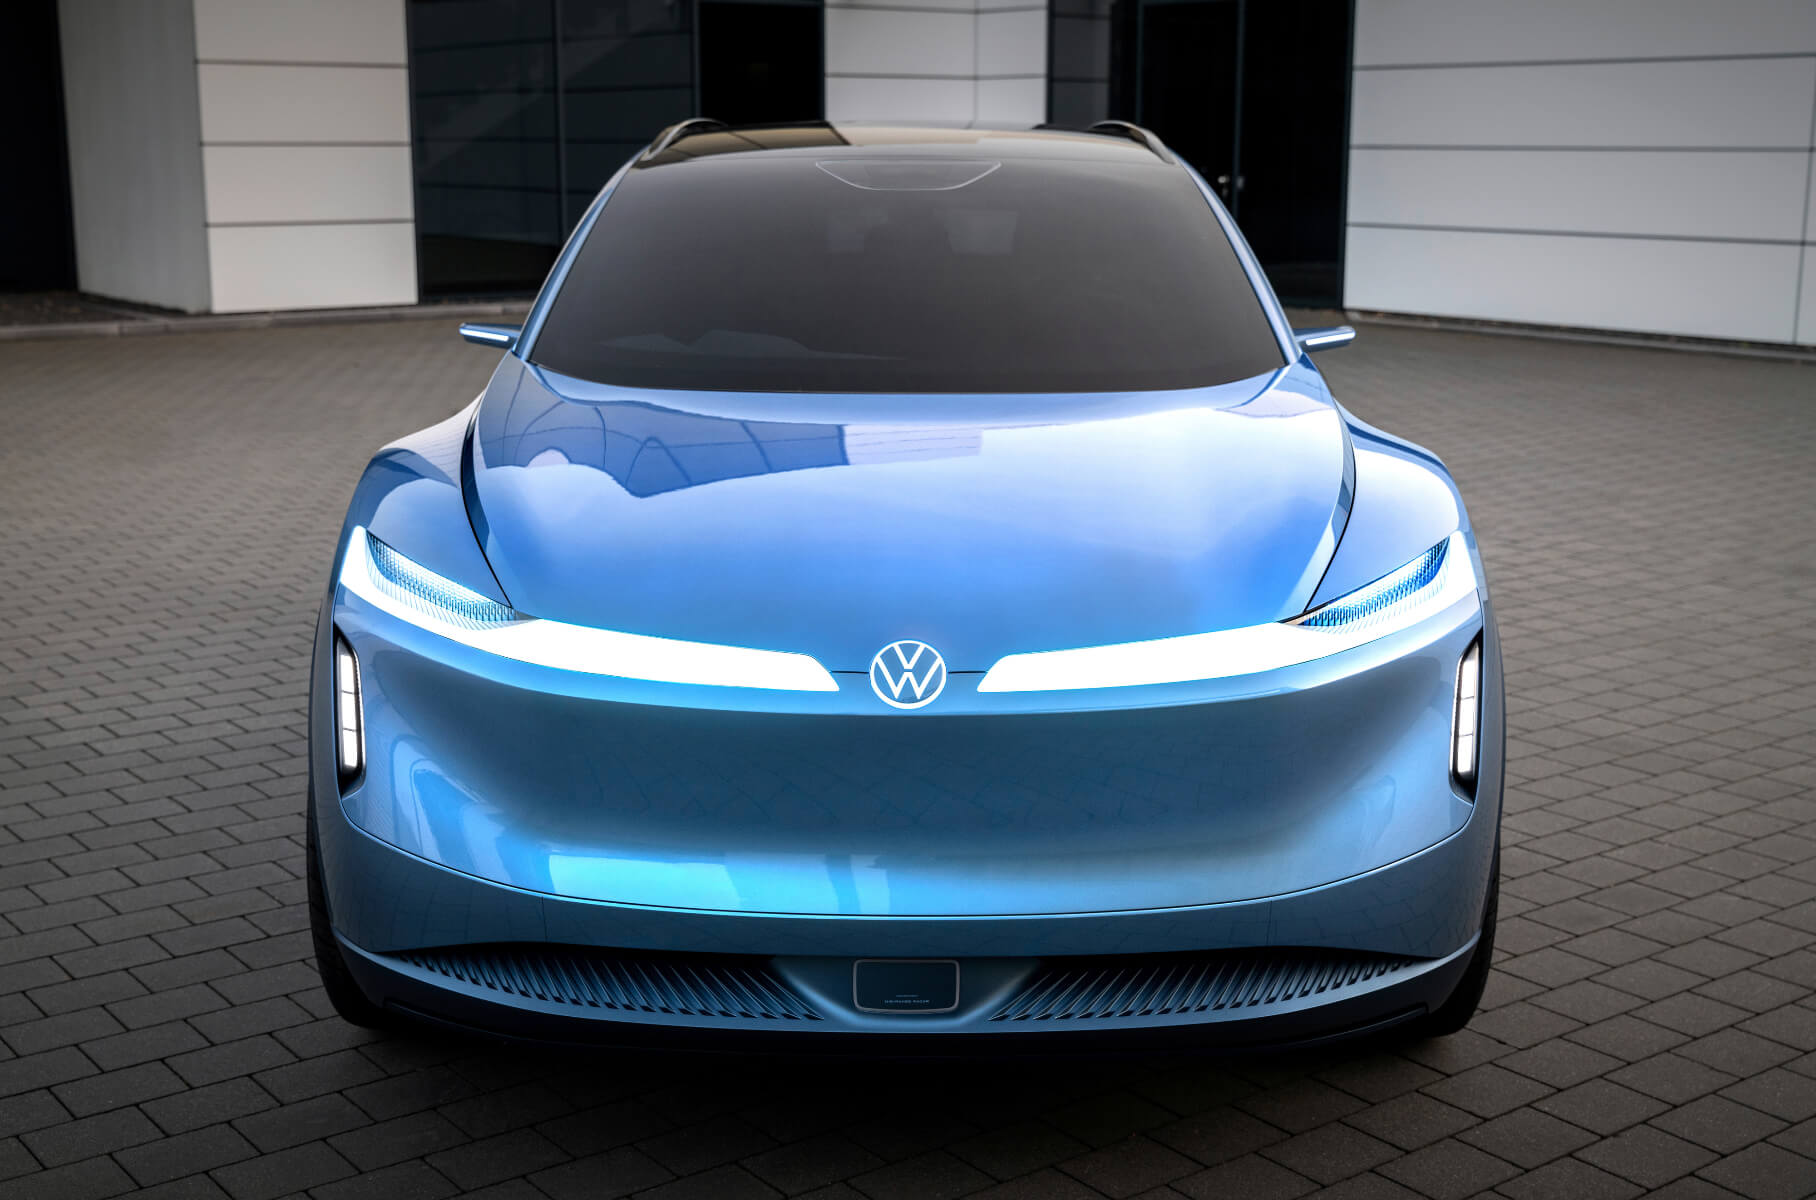 Volkswagen showed what future electric cars will be like for the Chinese